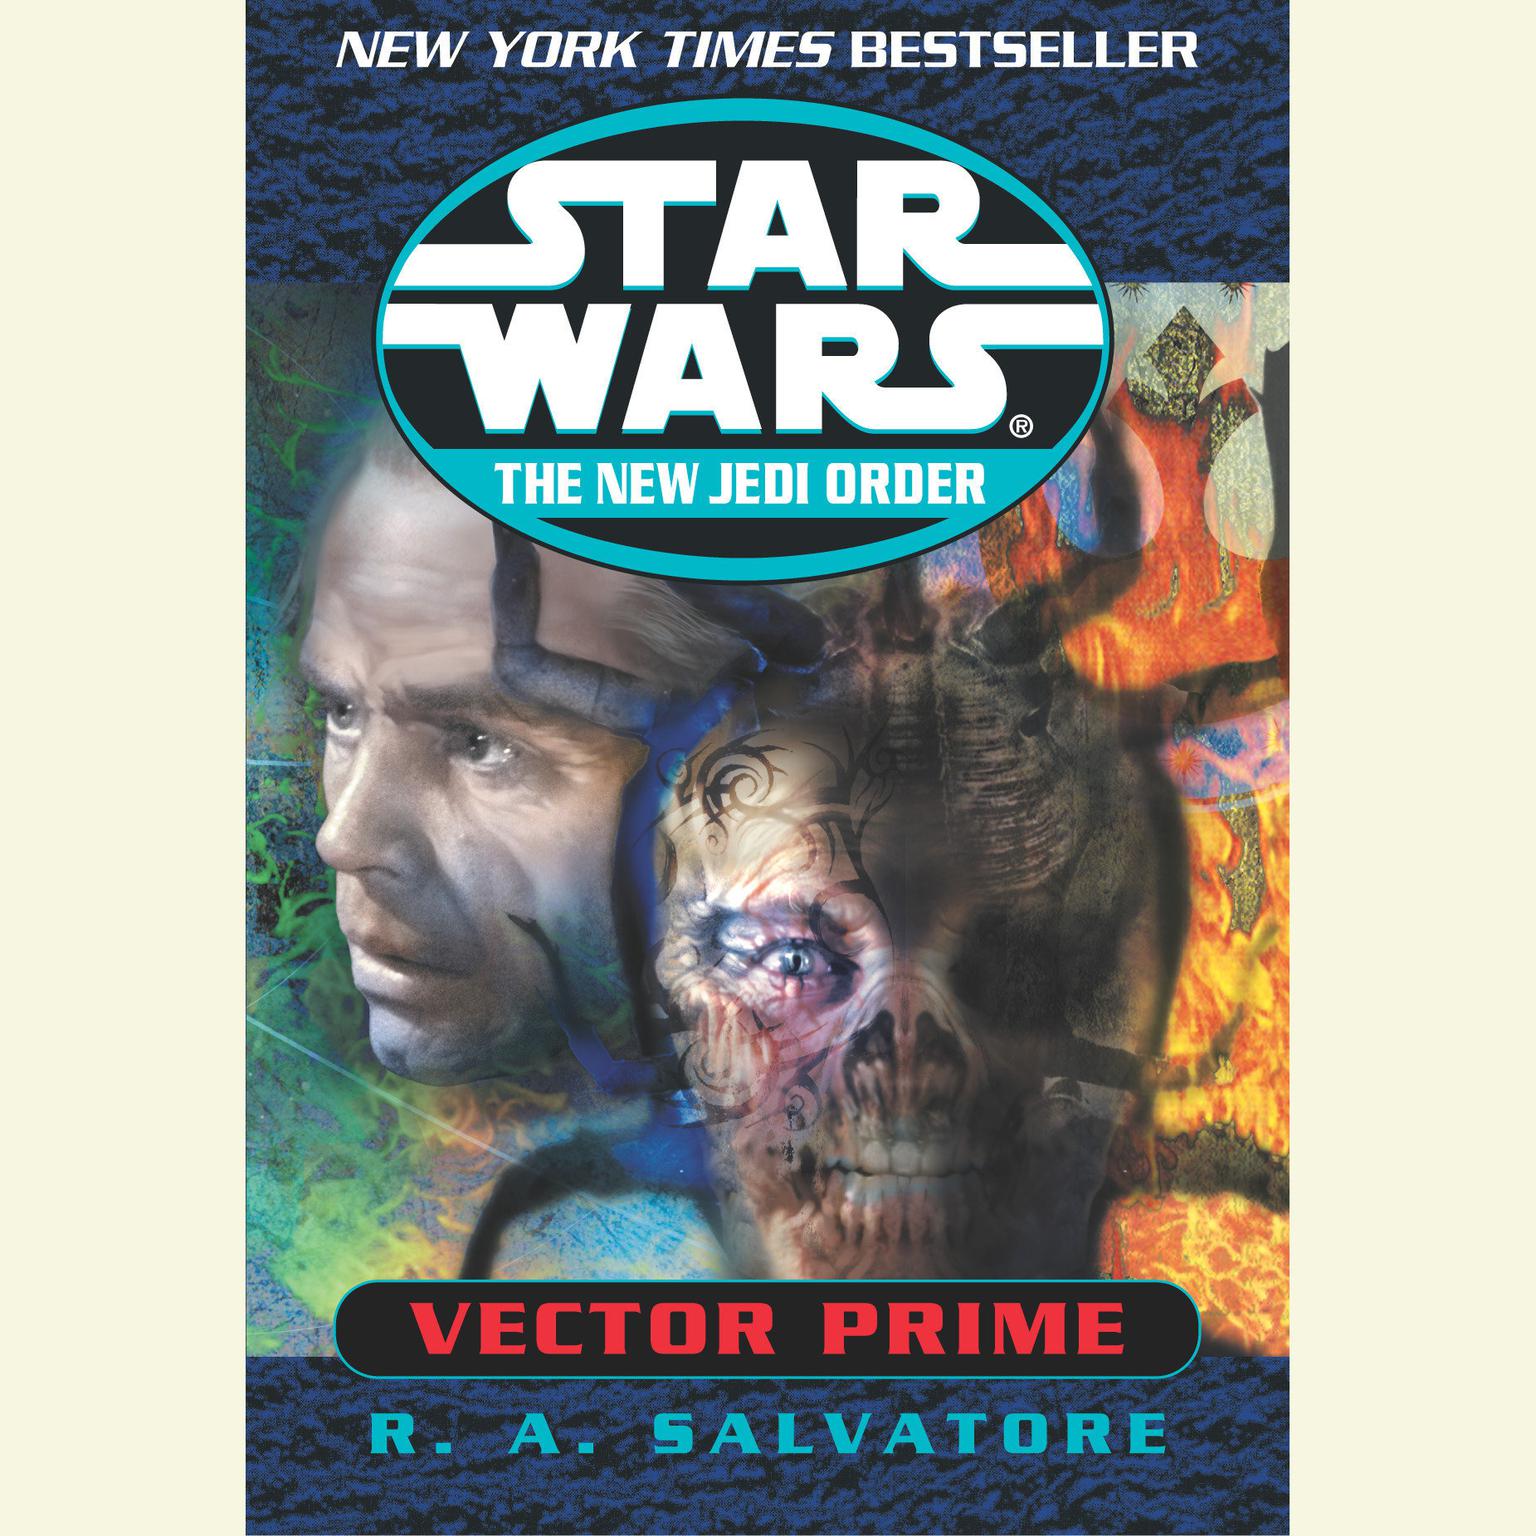 Vector Prime: Star Wars (The New Jedi Order) (Abridged) Audiobook, by R. A. Salvatore